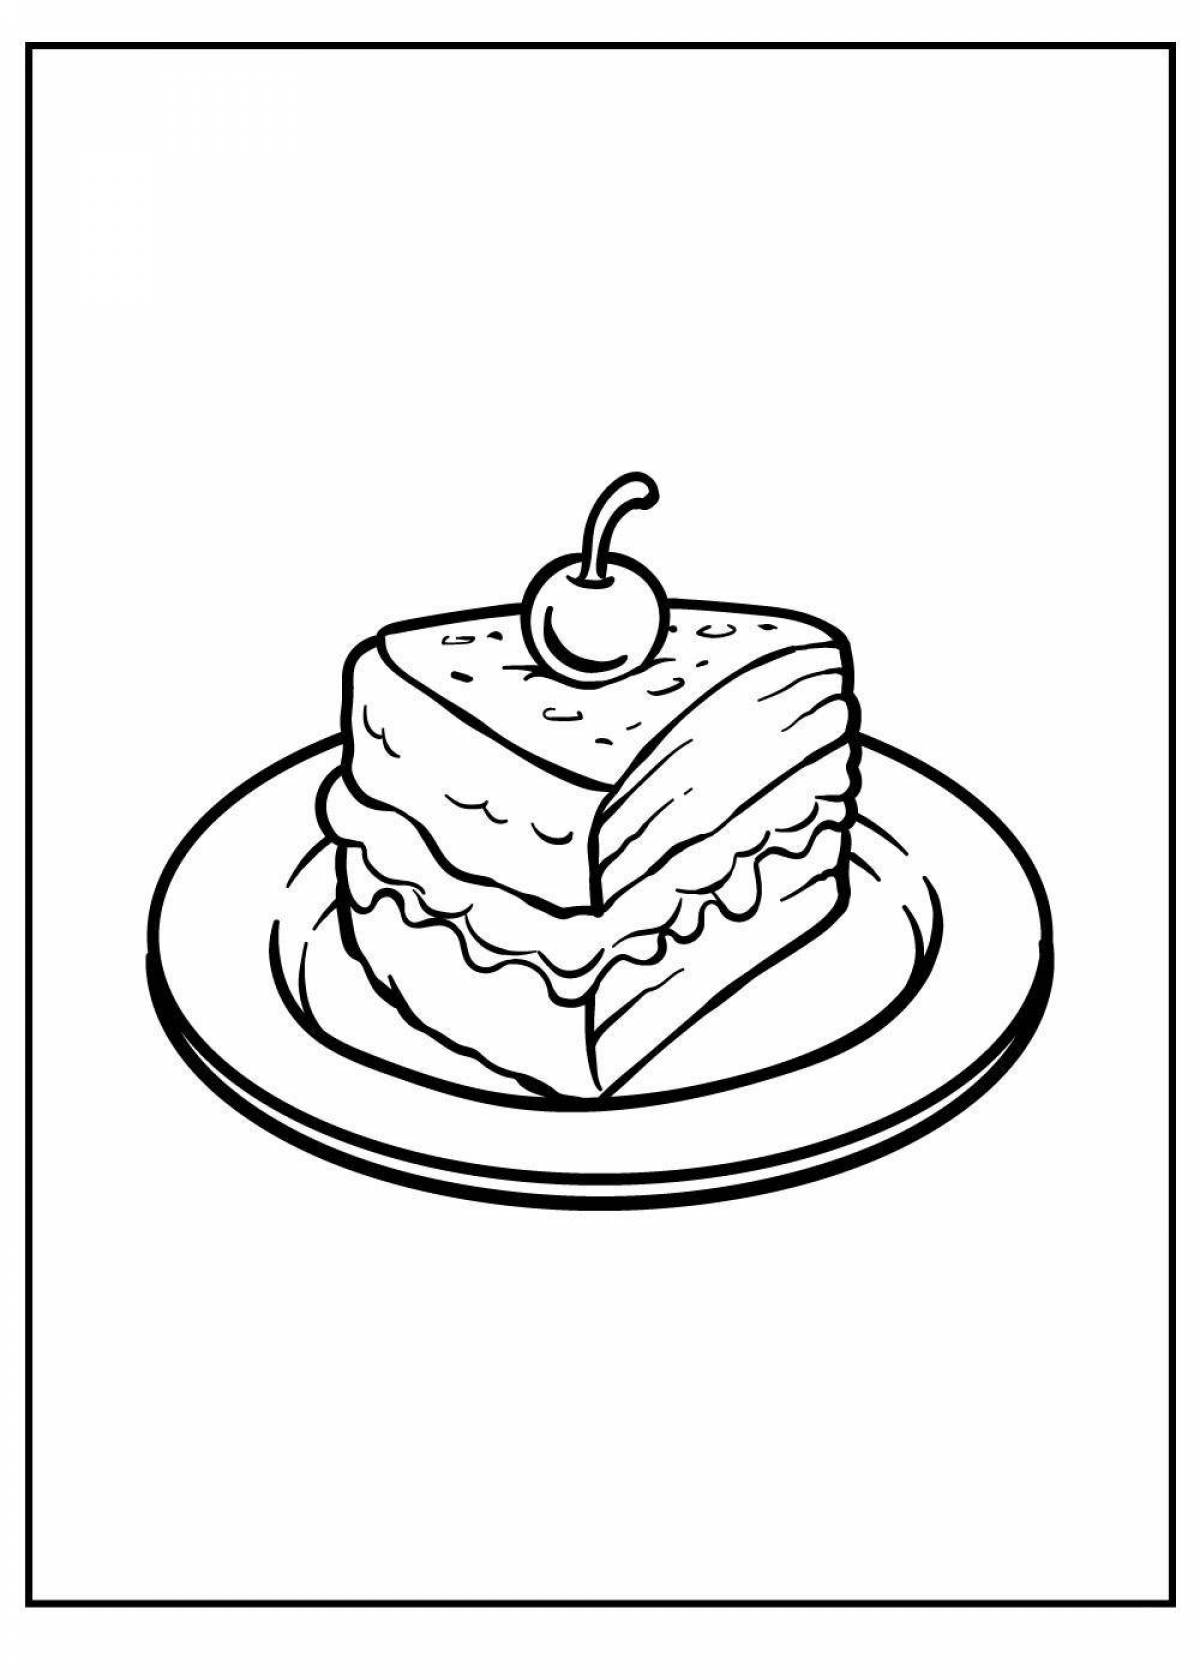 Slice of Pie Invitation Coloring Page